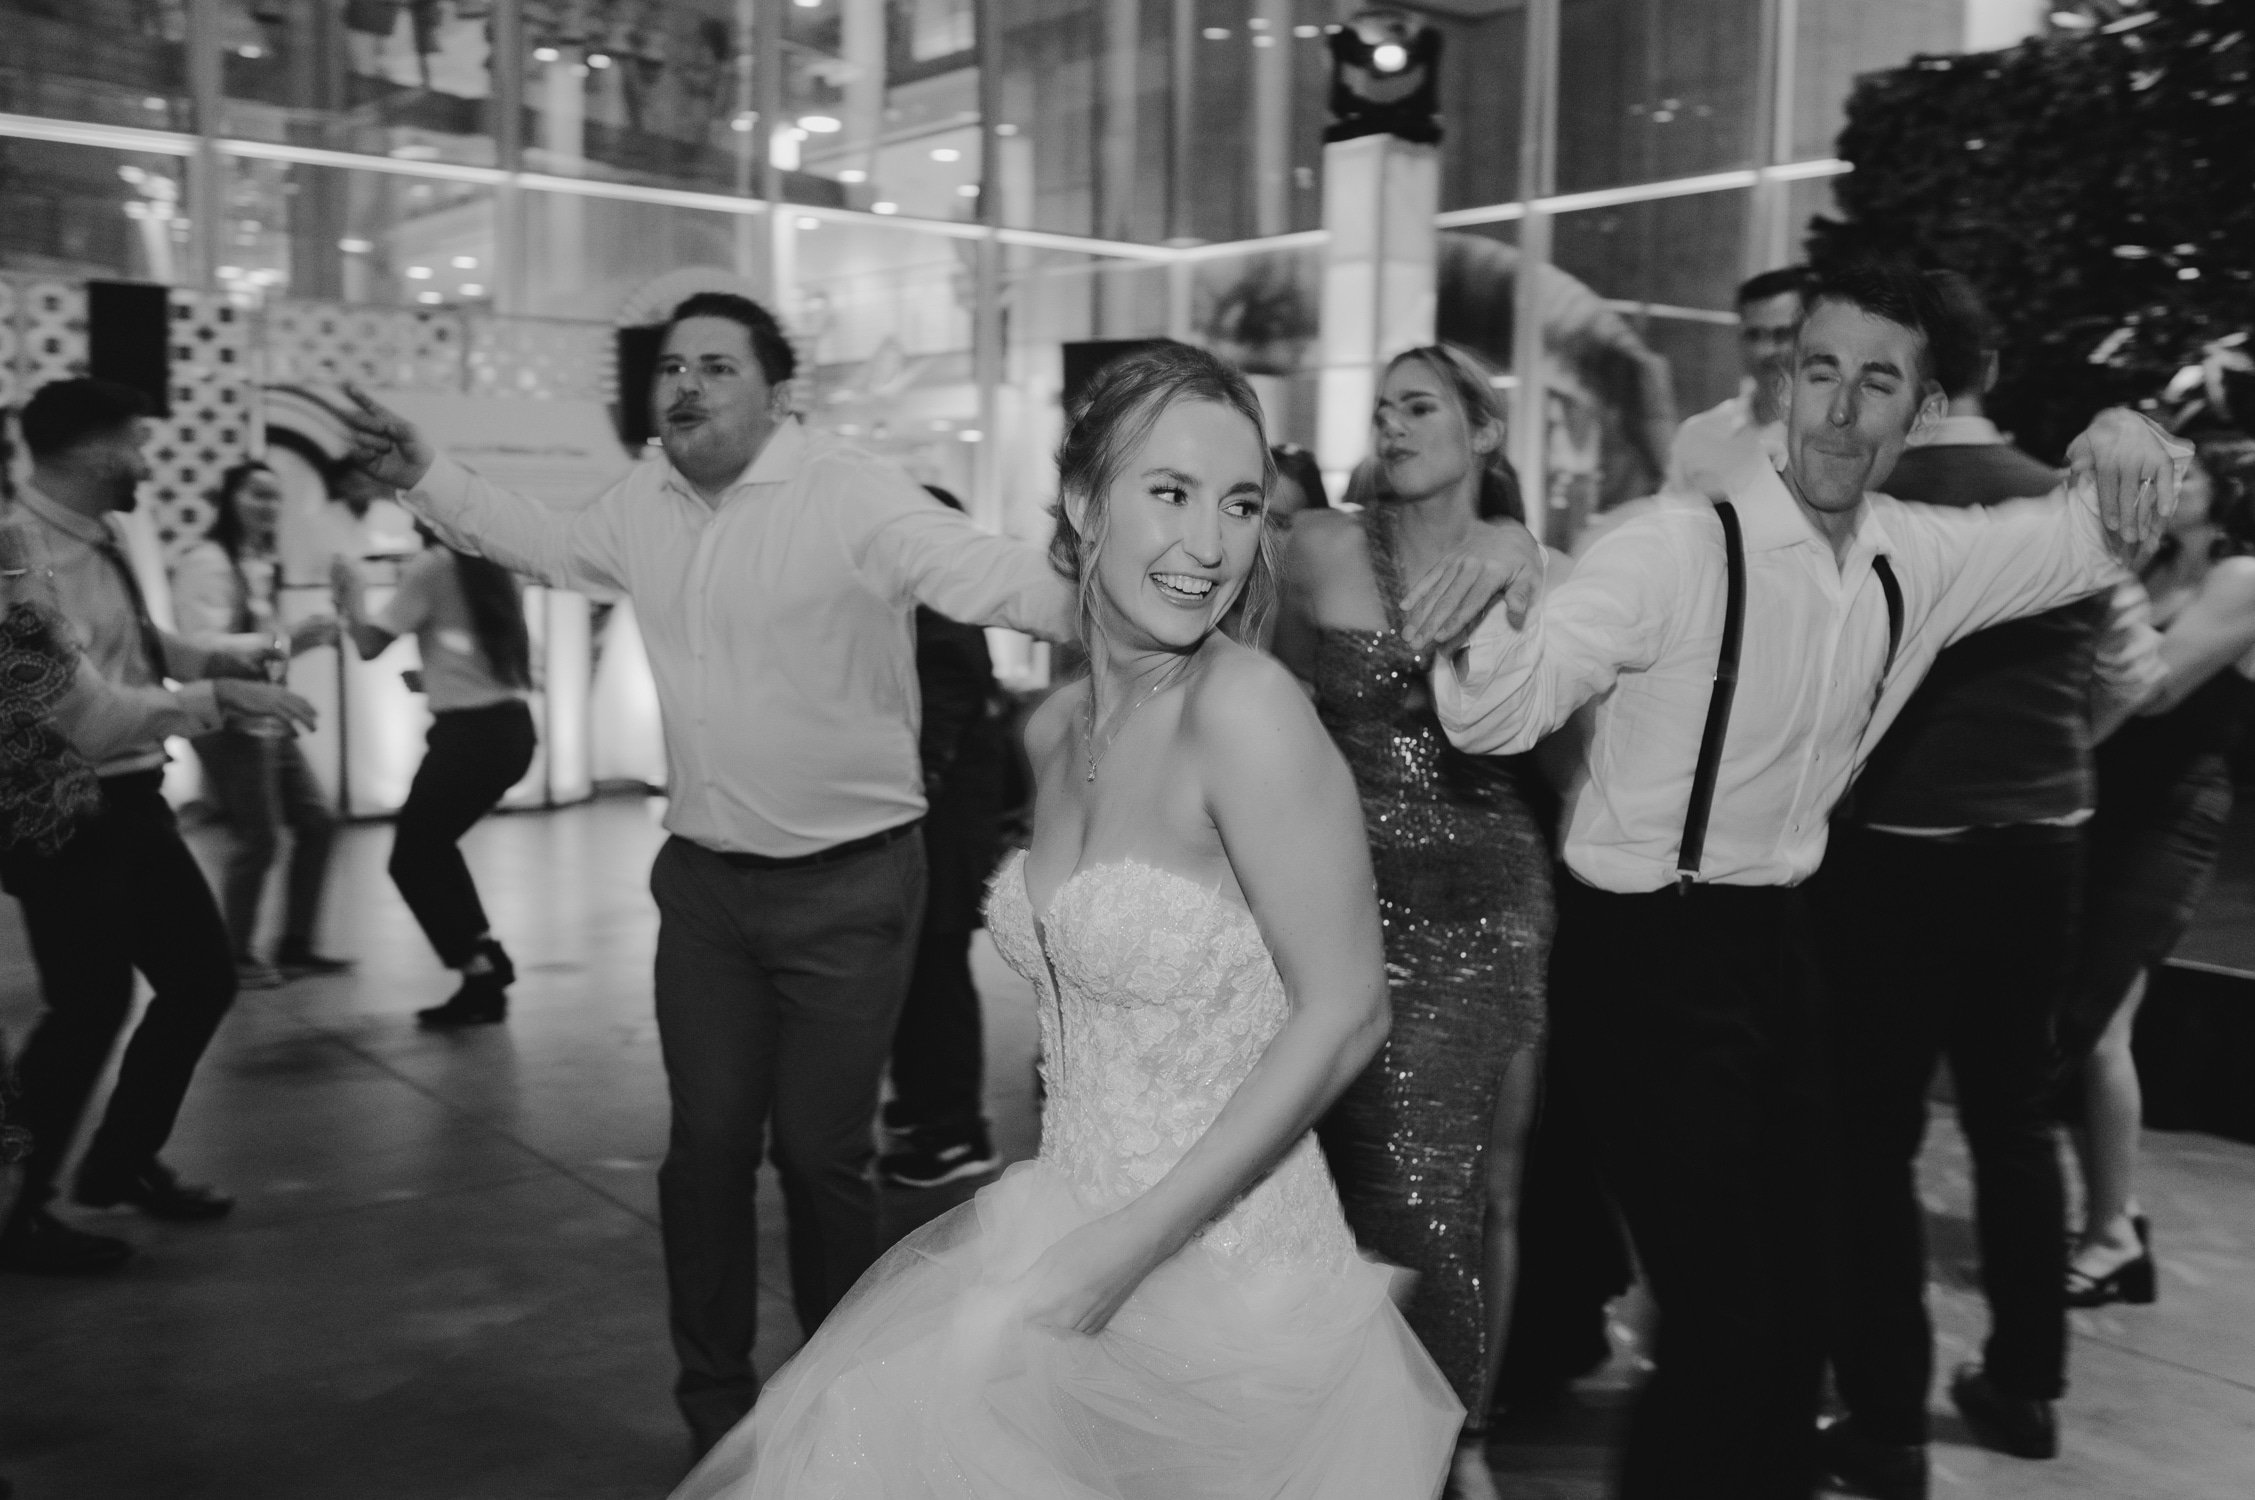 California academy of Sciences in San Francisco Wedding, photo of the bride dancing with the wedding guests